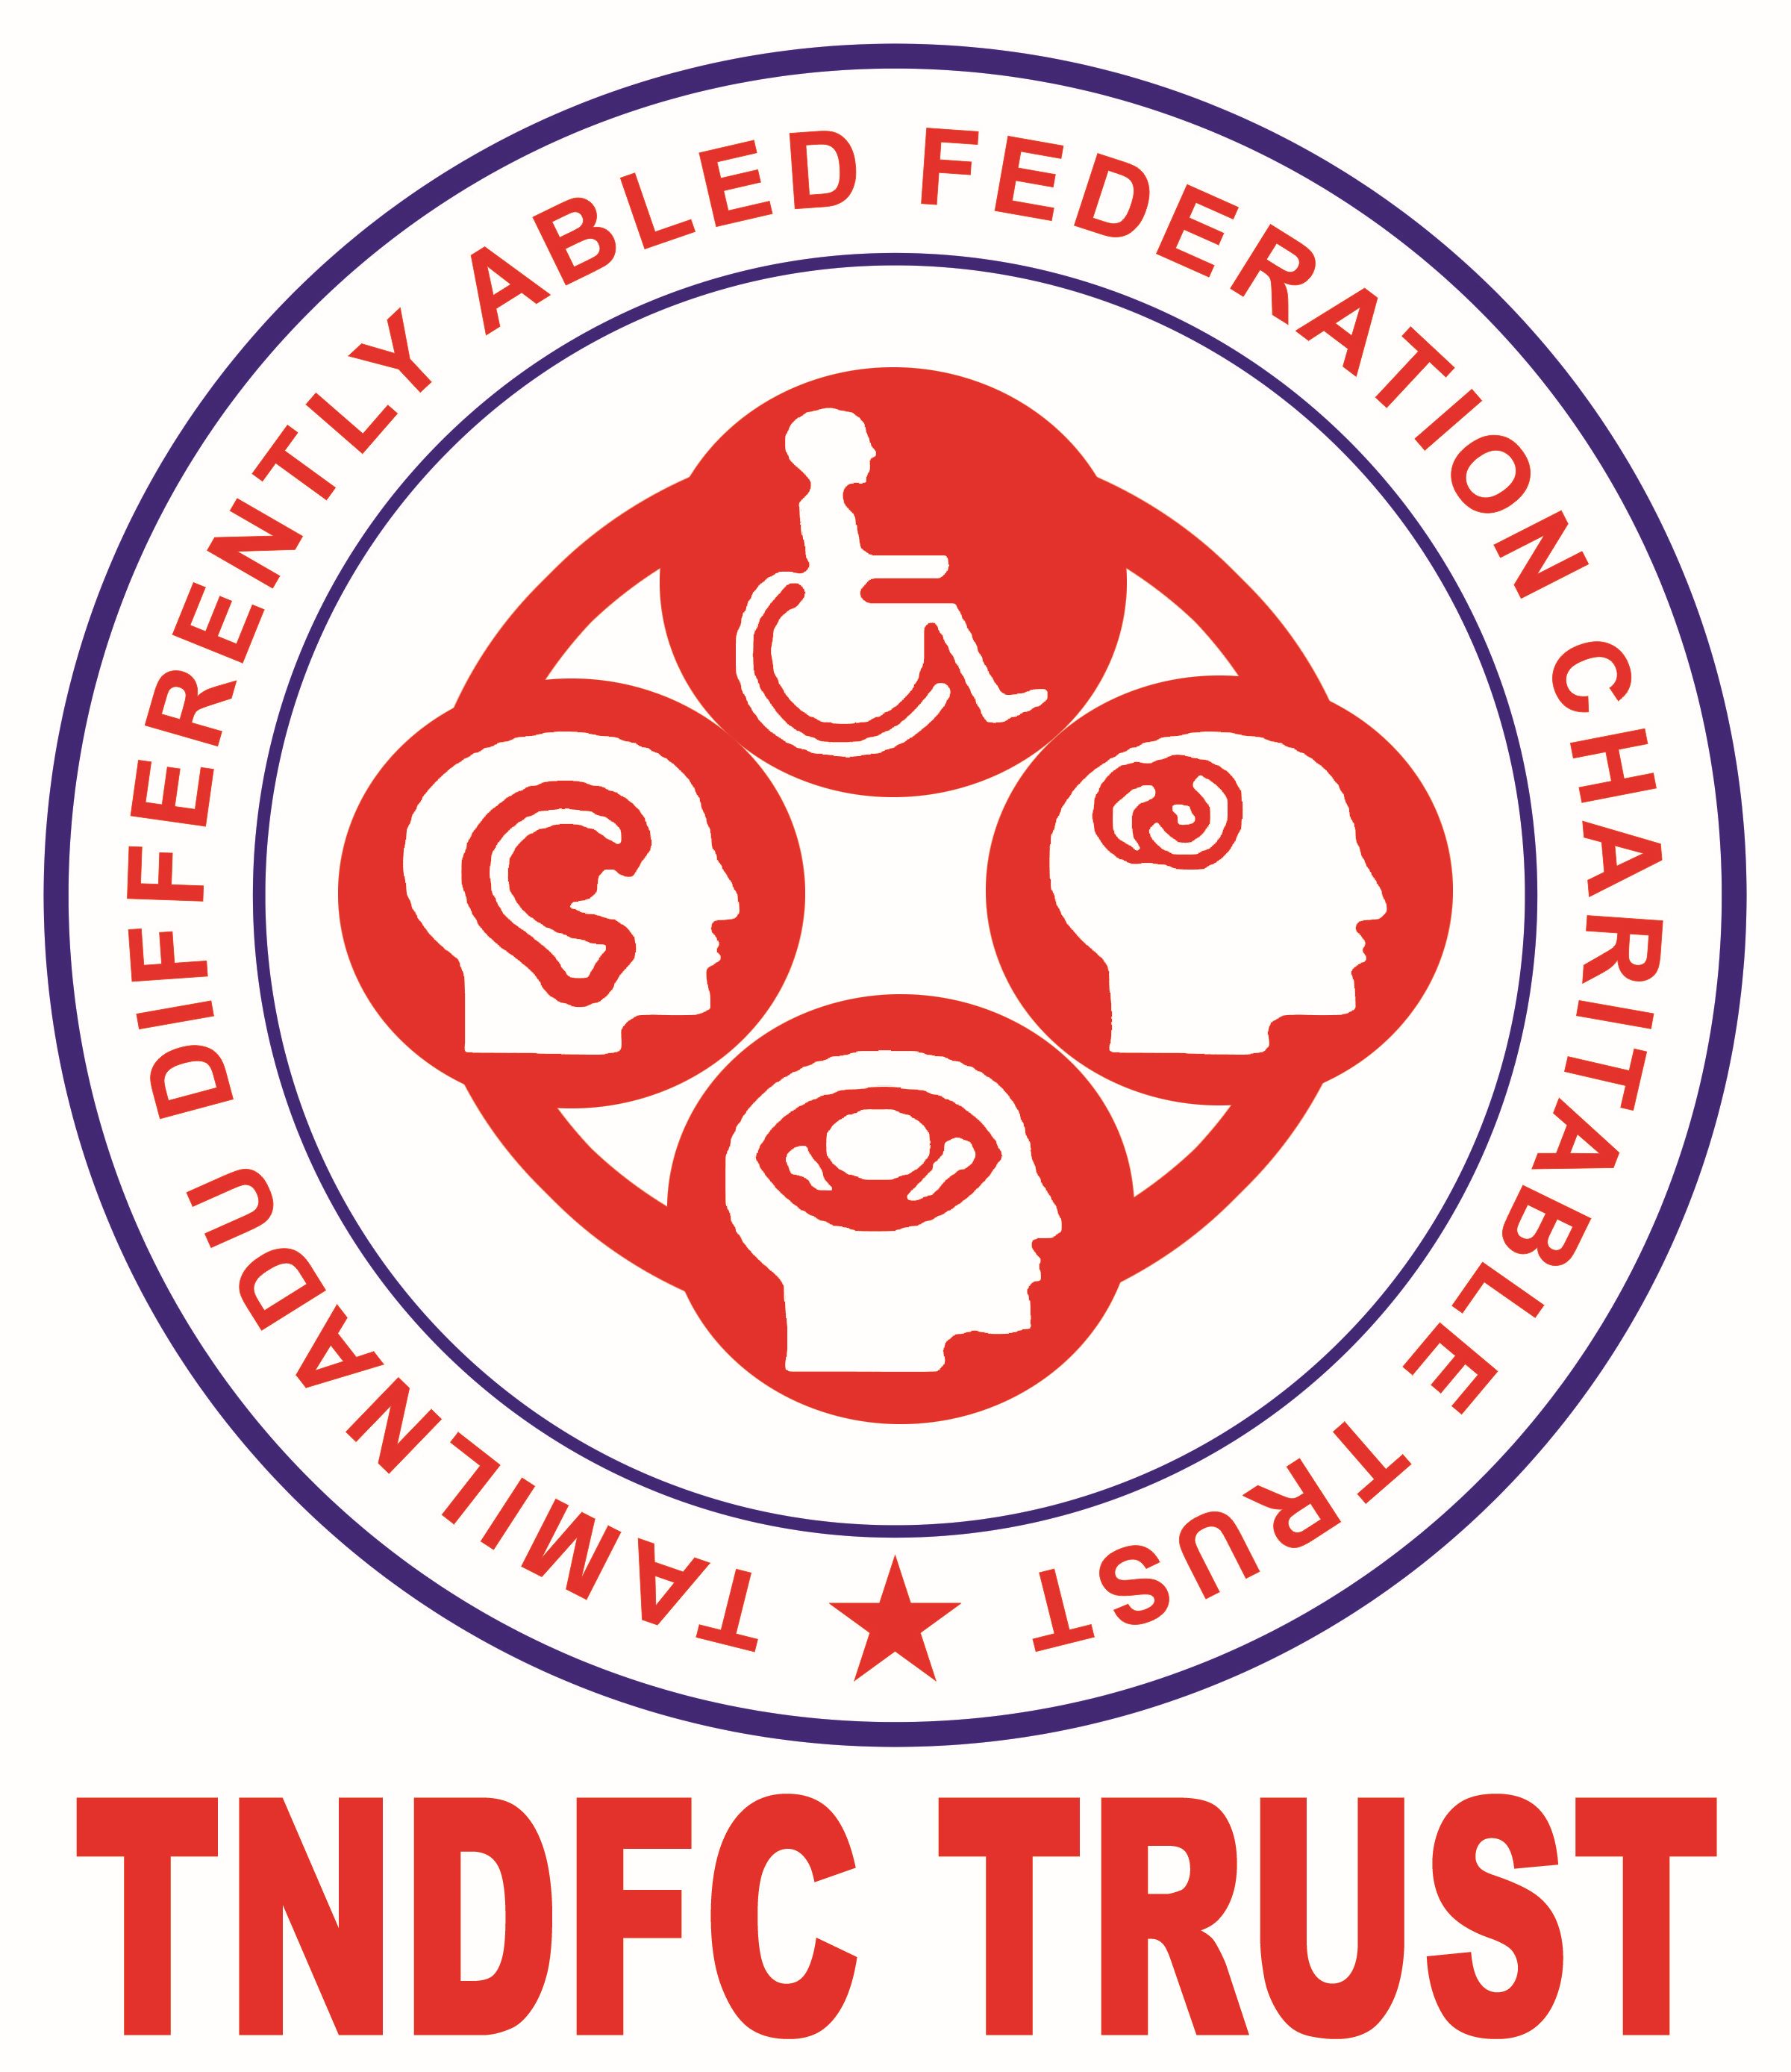 Tamilnadu Differently Abled Federation Charitable Trust